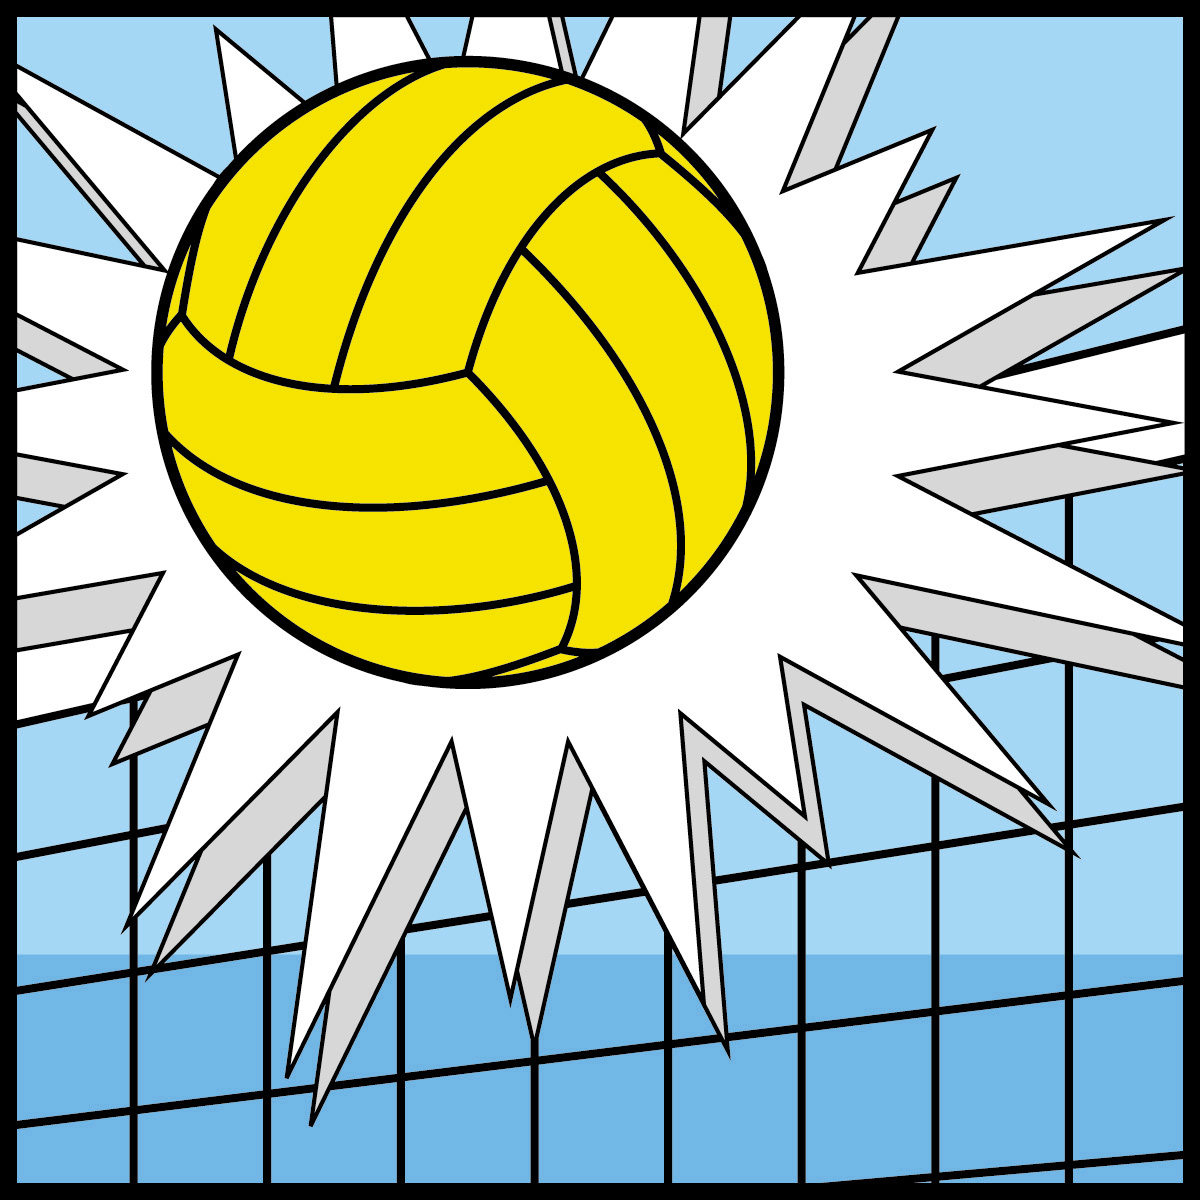 free volleyball clipart blue and yellow